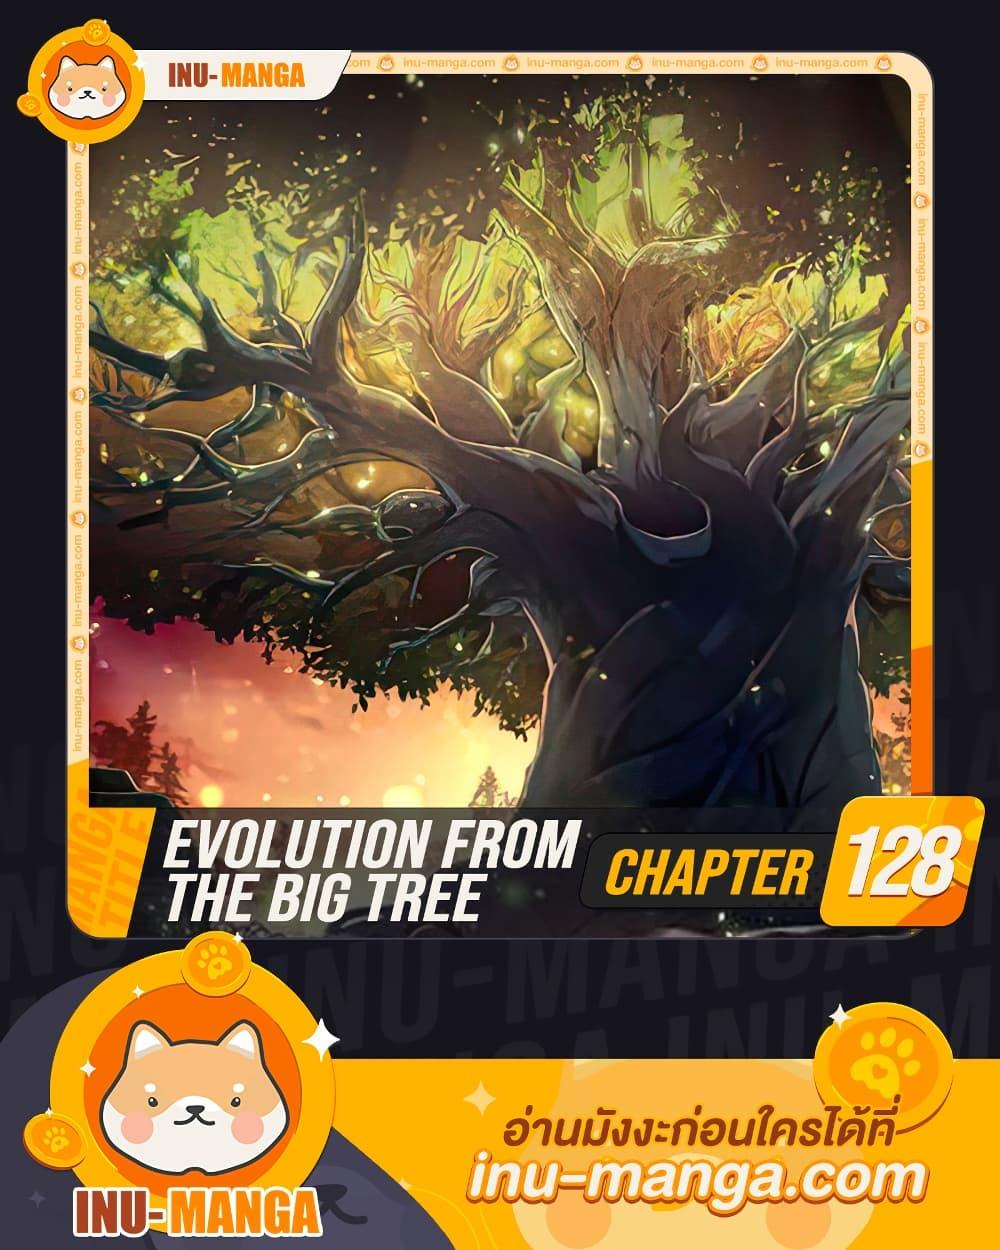 Evolution from the Big Tree 128 01